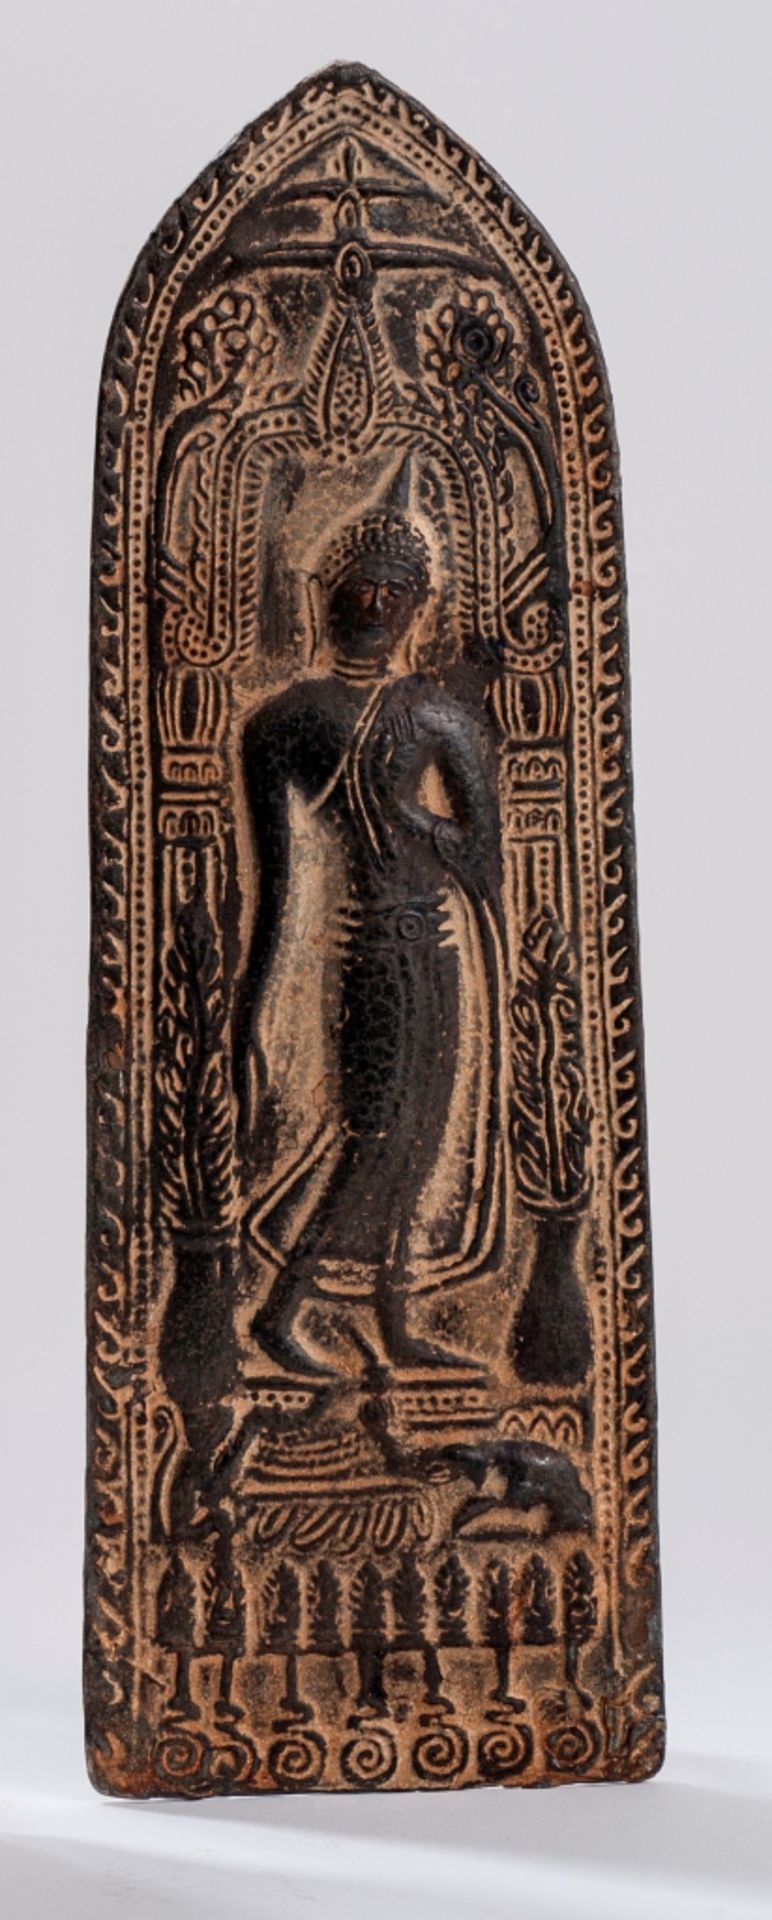 A VERY APPEALING DEPICTION OF A WALKING BUDDHA   Panel, metal alloy. Thailand, 19th / 20th cent.